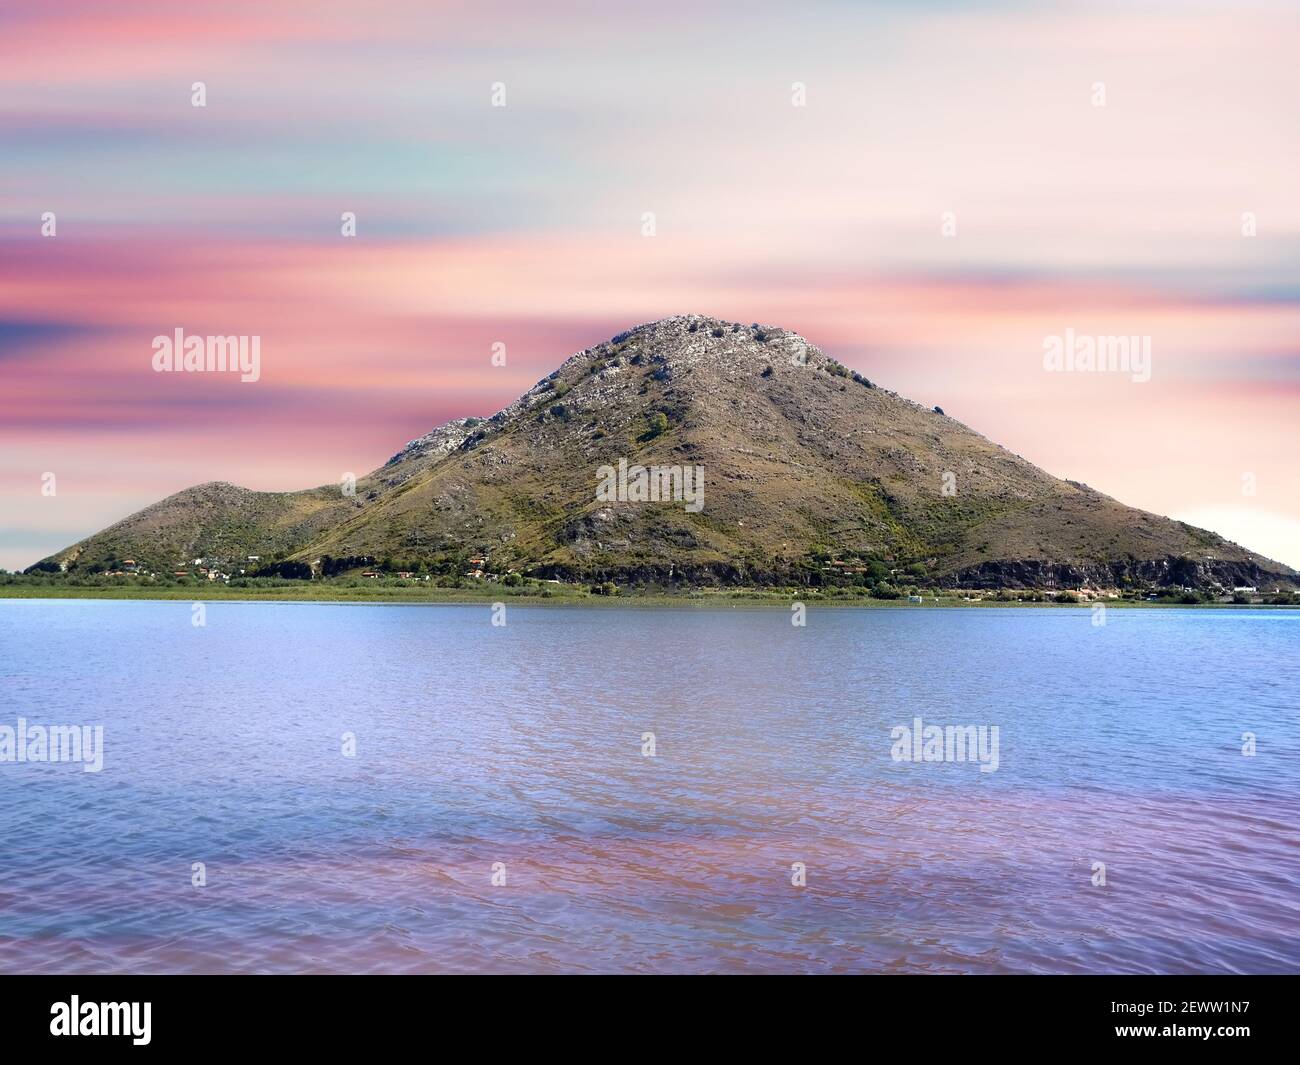 Scenic view of lake skadar and mountains at sunset, Lake in Europe. Stock Photo